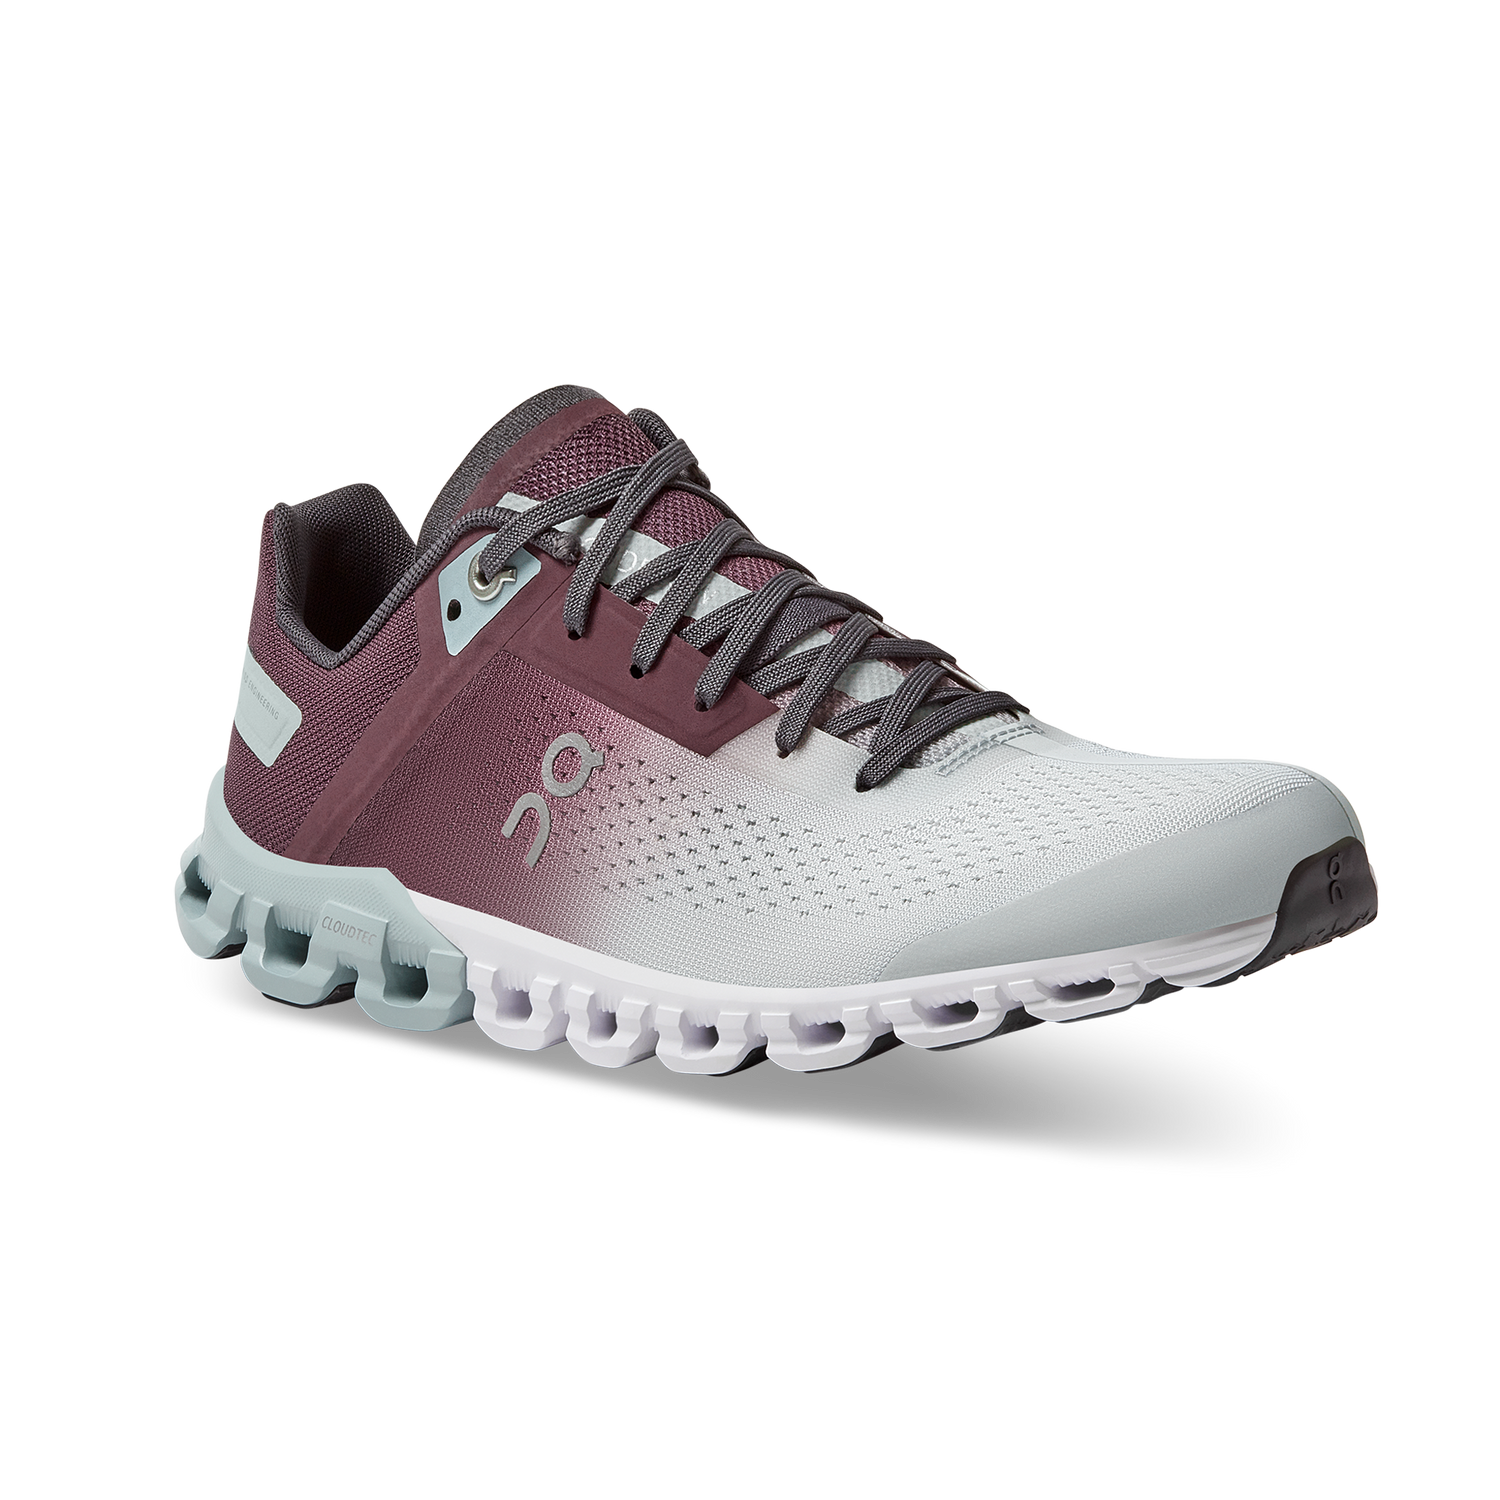 Women's ON Cloudflow running shoe in ombre burgundy to white, with light sage details.